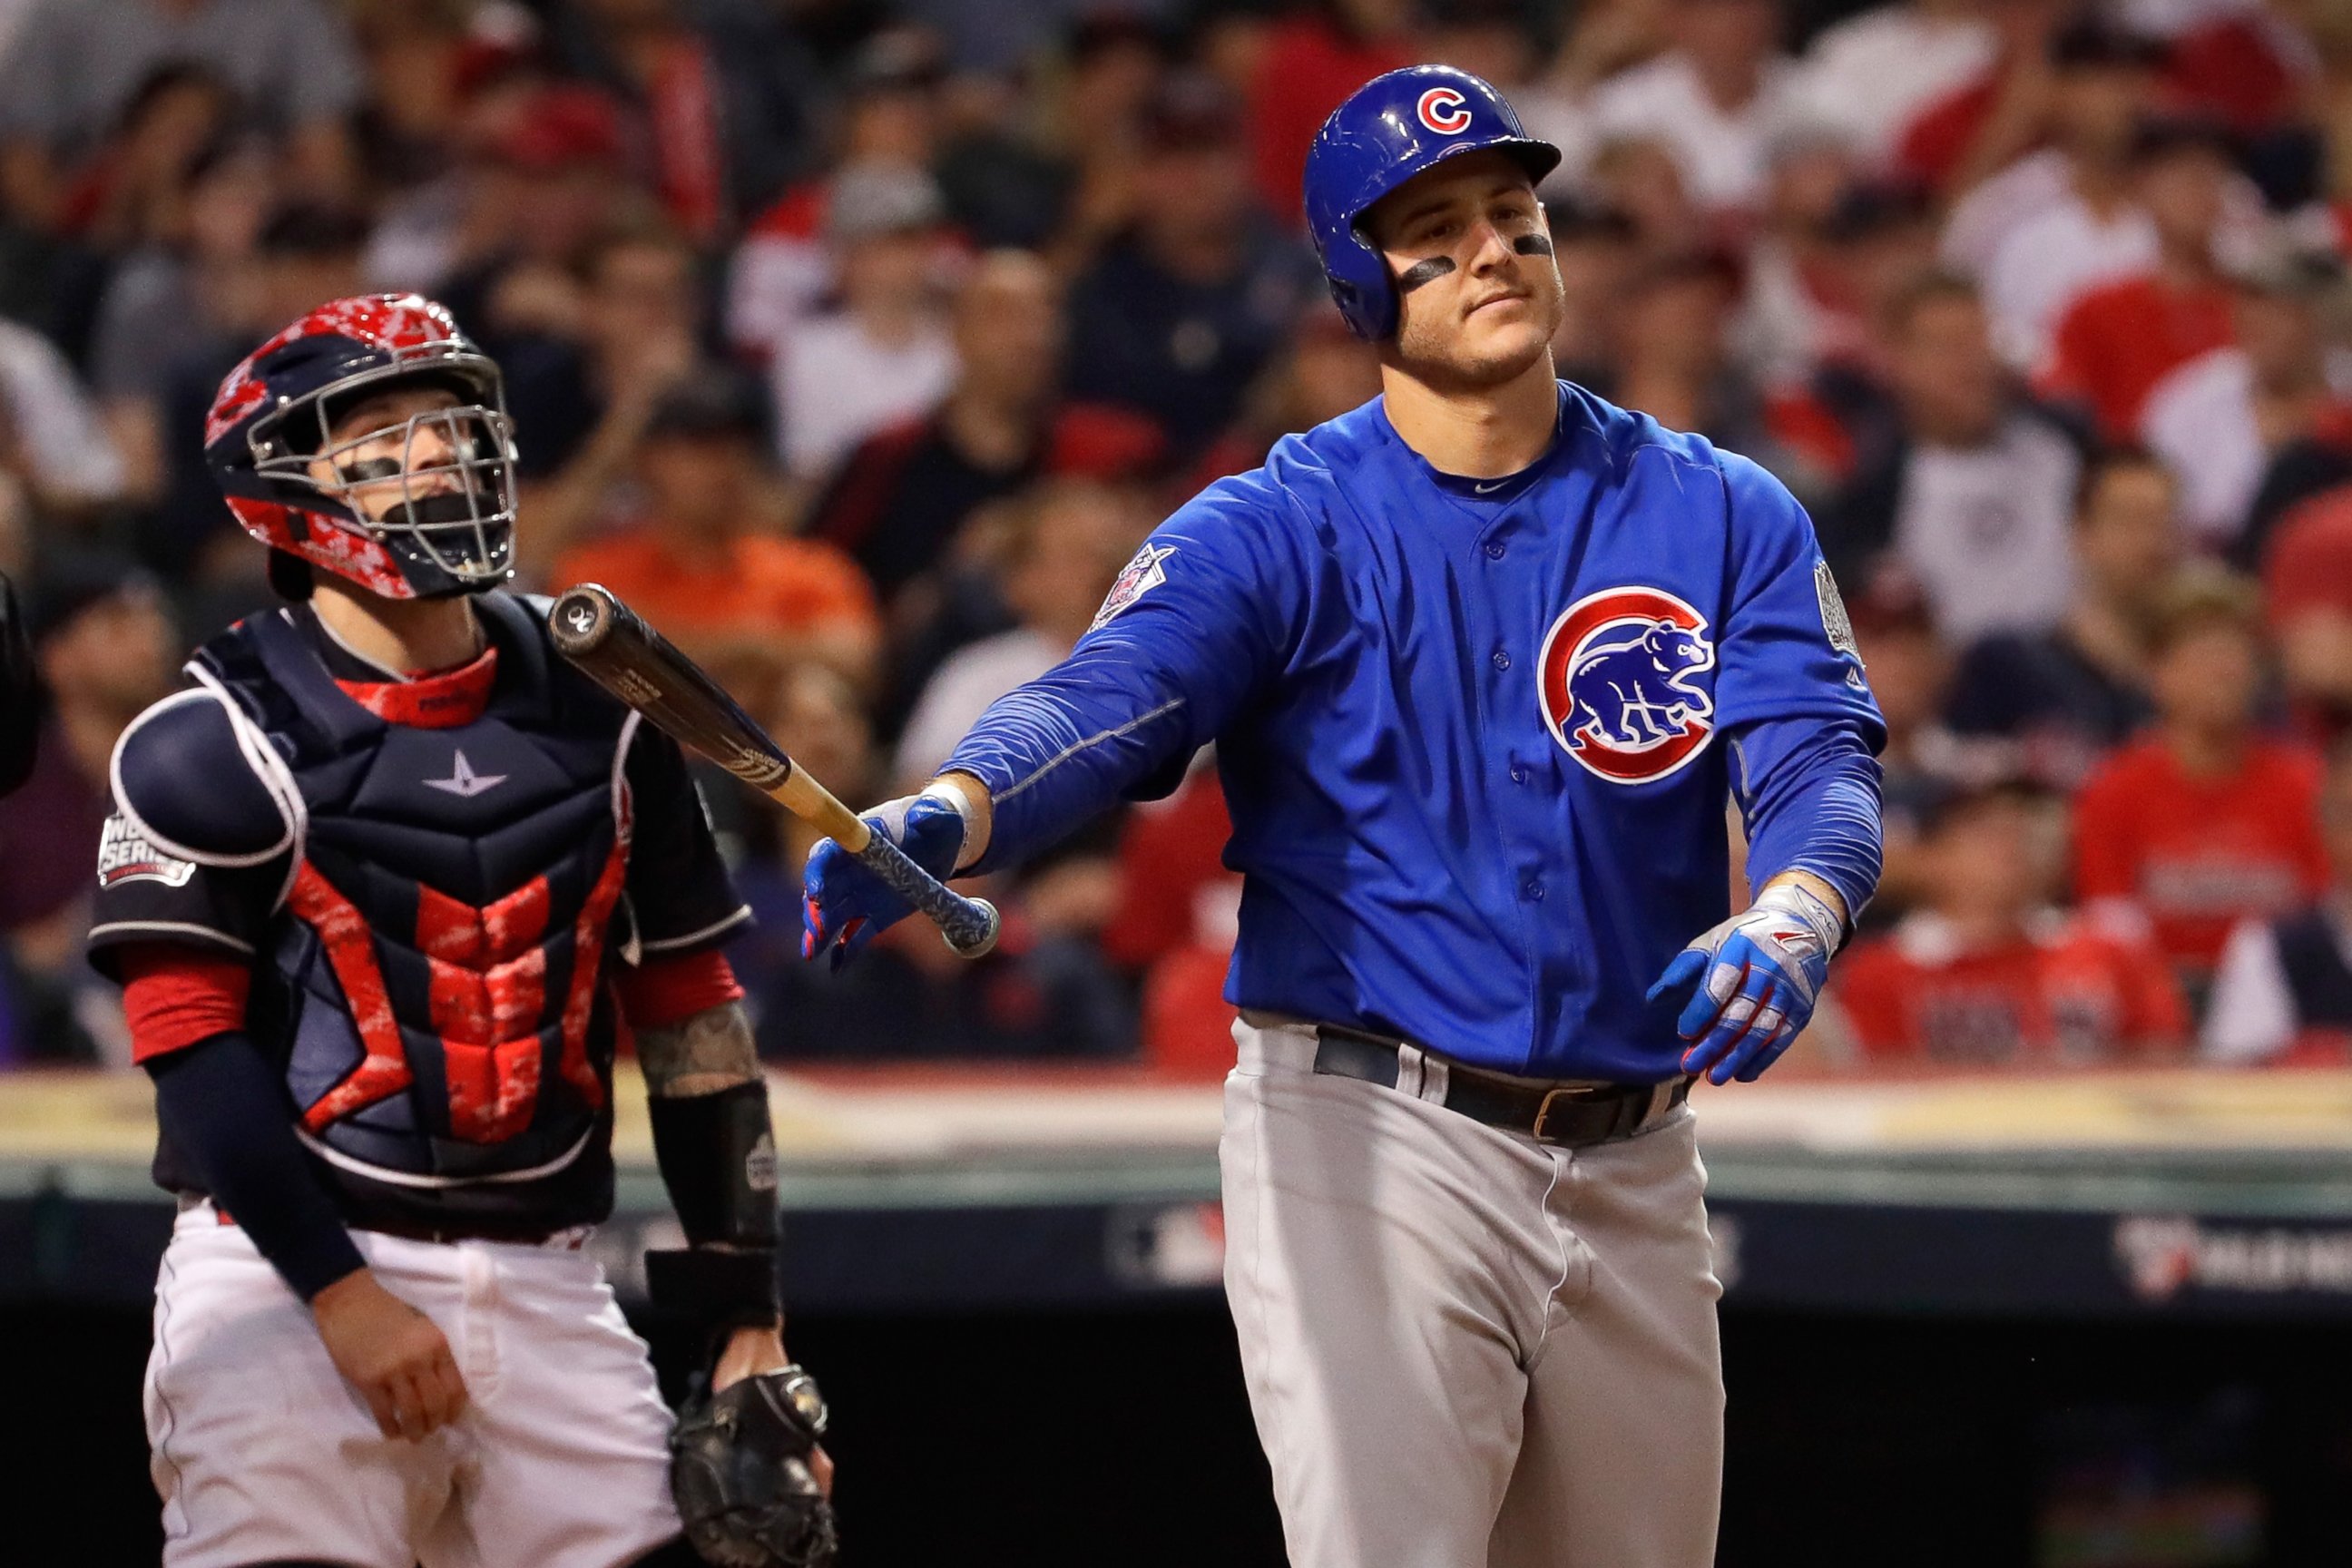 PHOTO: Anthony Rizzo #44 of the Chicago Cubs reacts after hitting a two-run home run during the ninth inning against the Cleveland Indians in Game Six of the 2016 World Series at Progressive Field, Nov. 1, 2016 in Cleveland, Ohio.